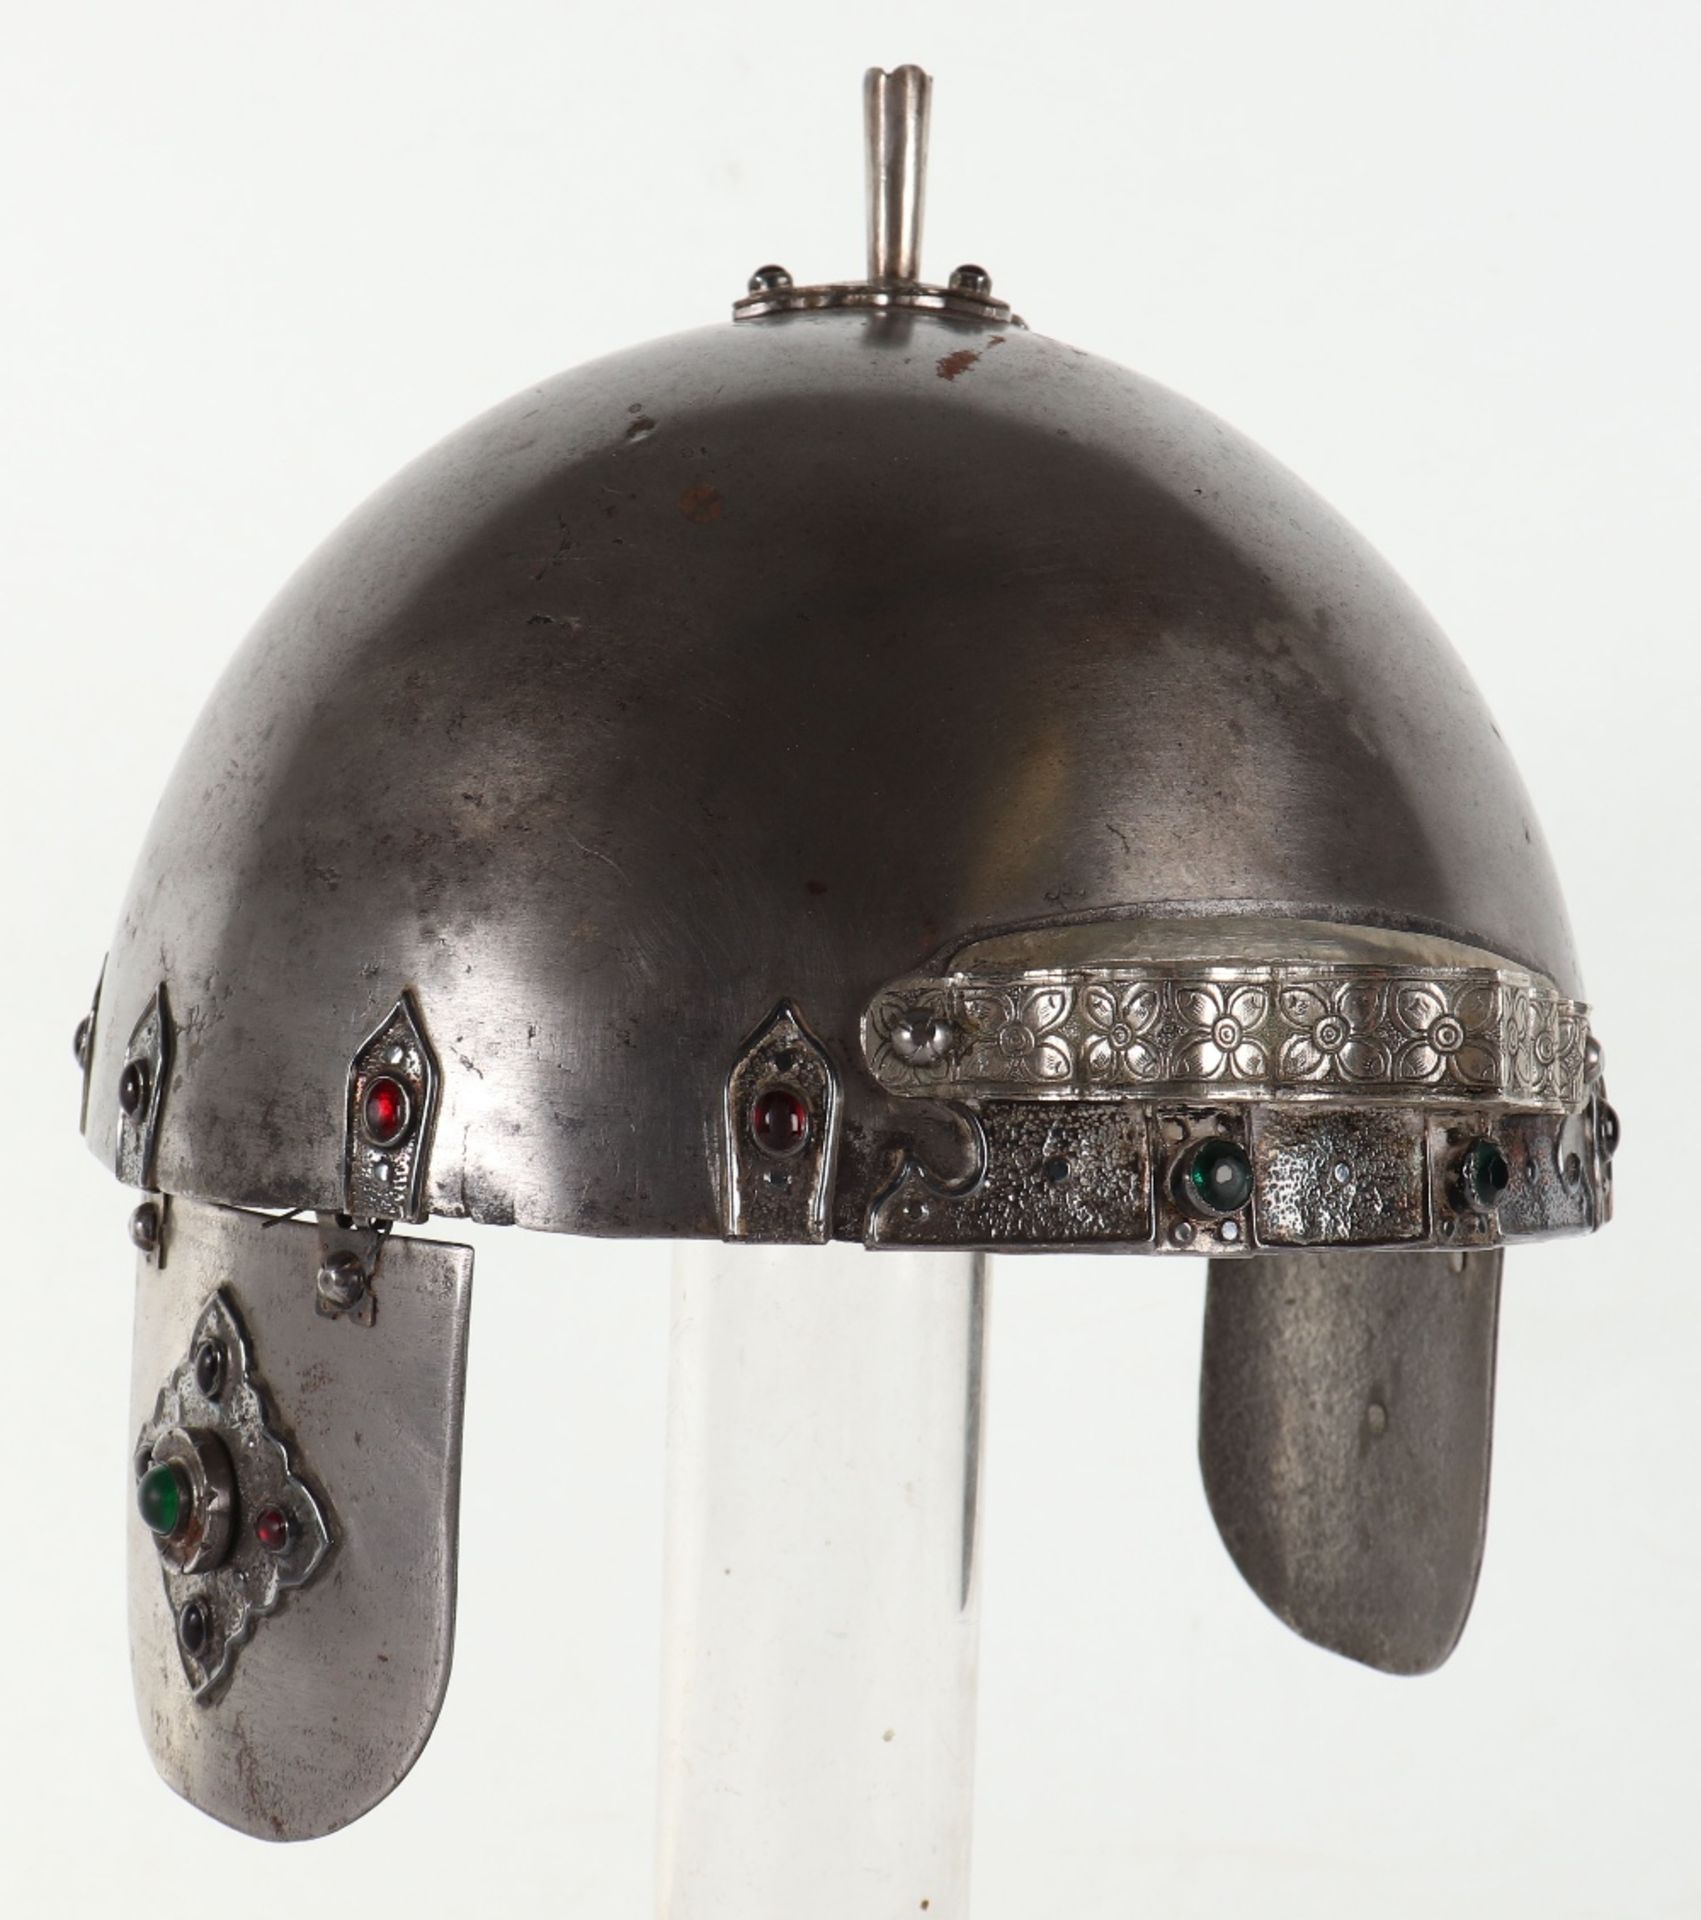 Bhutanese Helmet Possibly 18th or 19th Century - Image 12 of 15